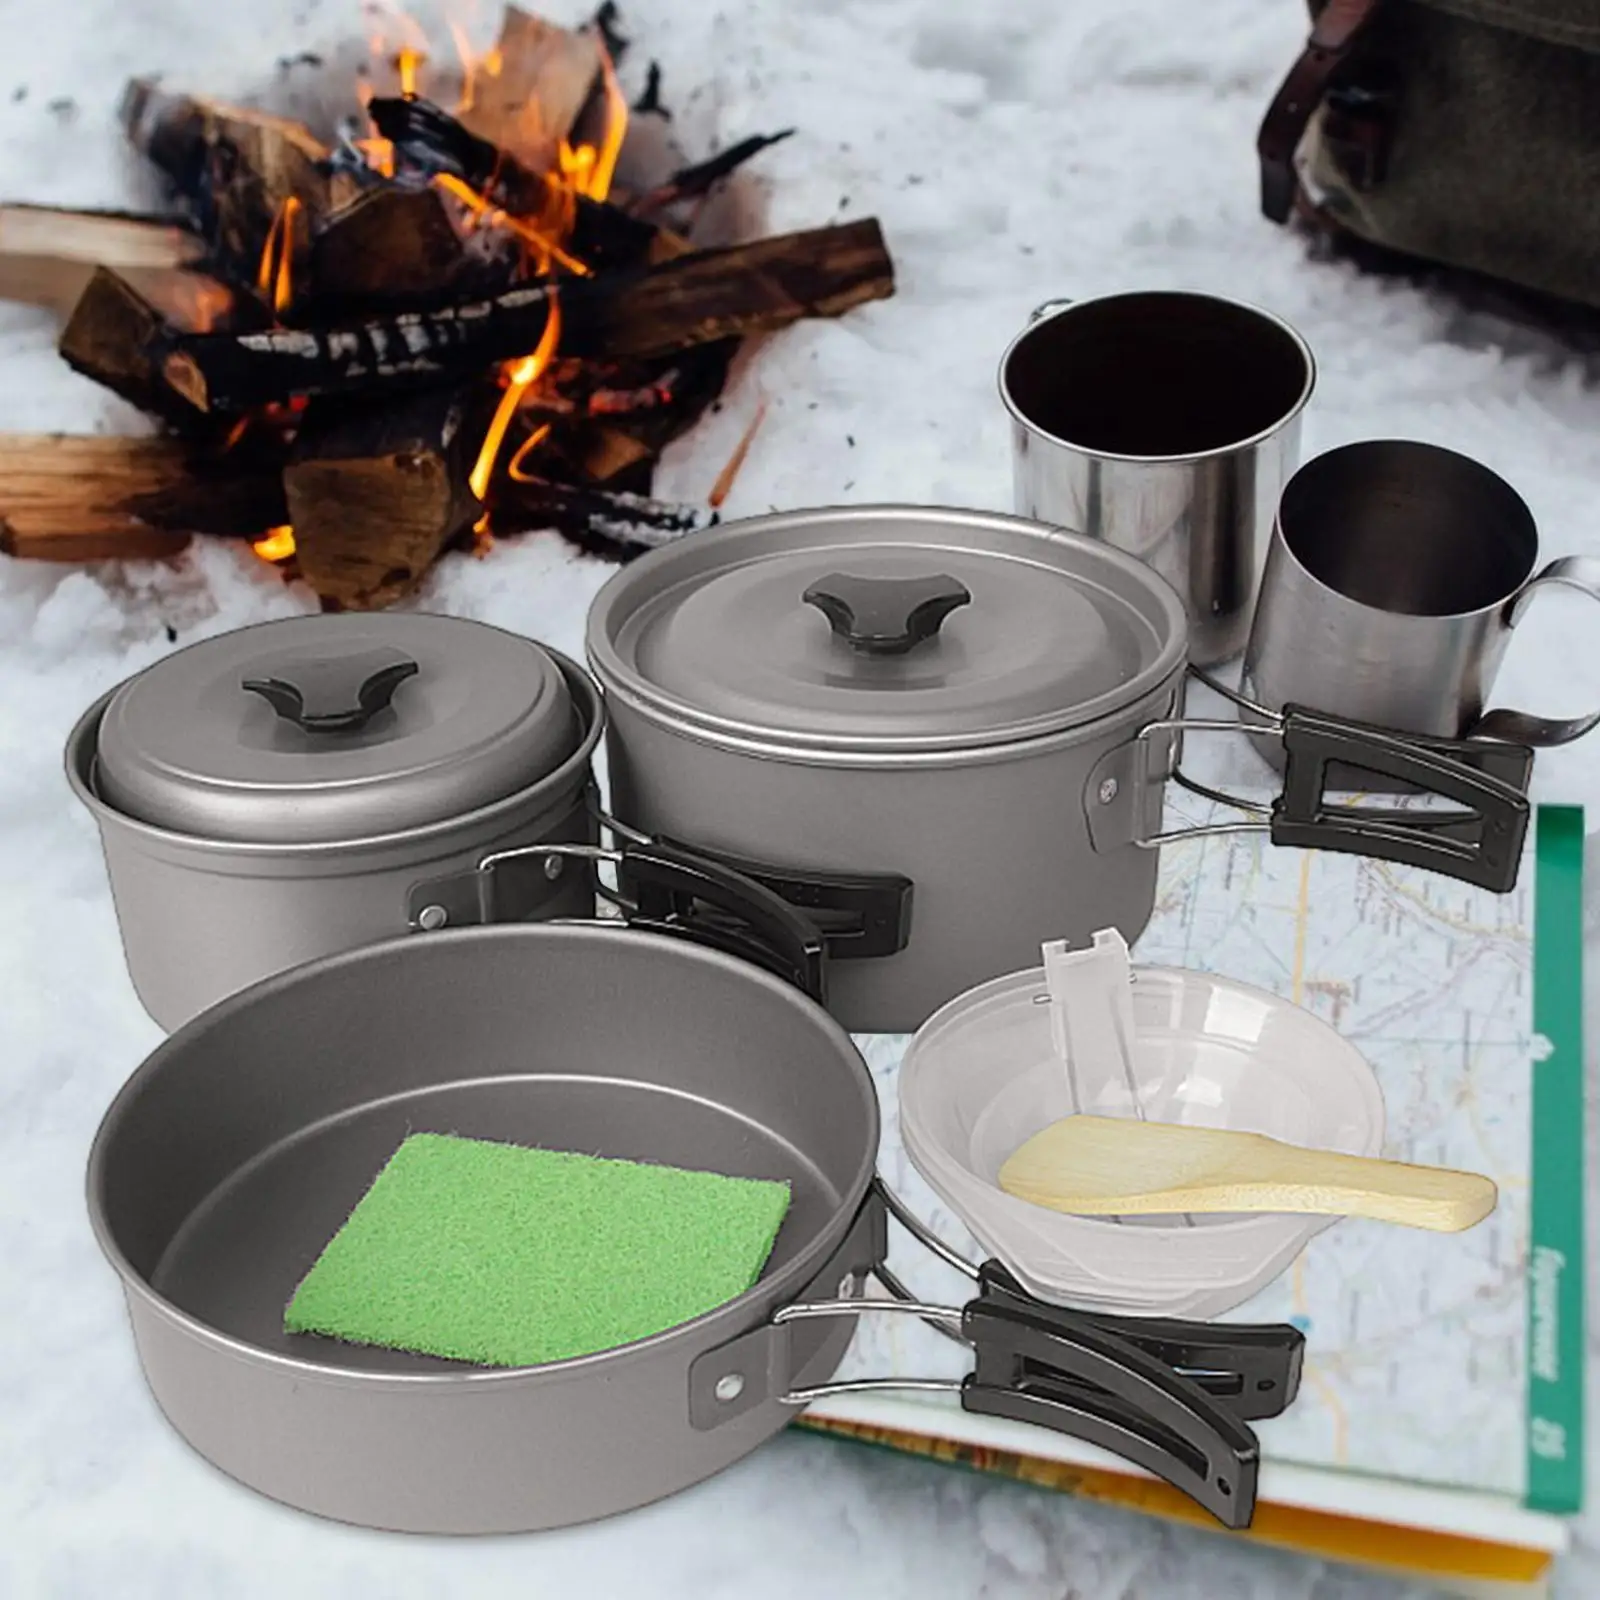 Camping Cookware Set Easy to Clean with Folding Handles Compact Pot and Pan for Camp Outdoor Backpacking Picnic Accessories